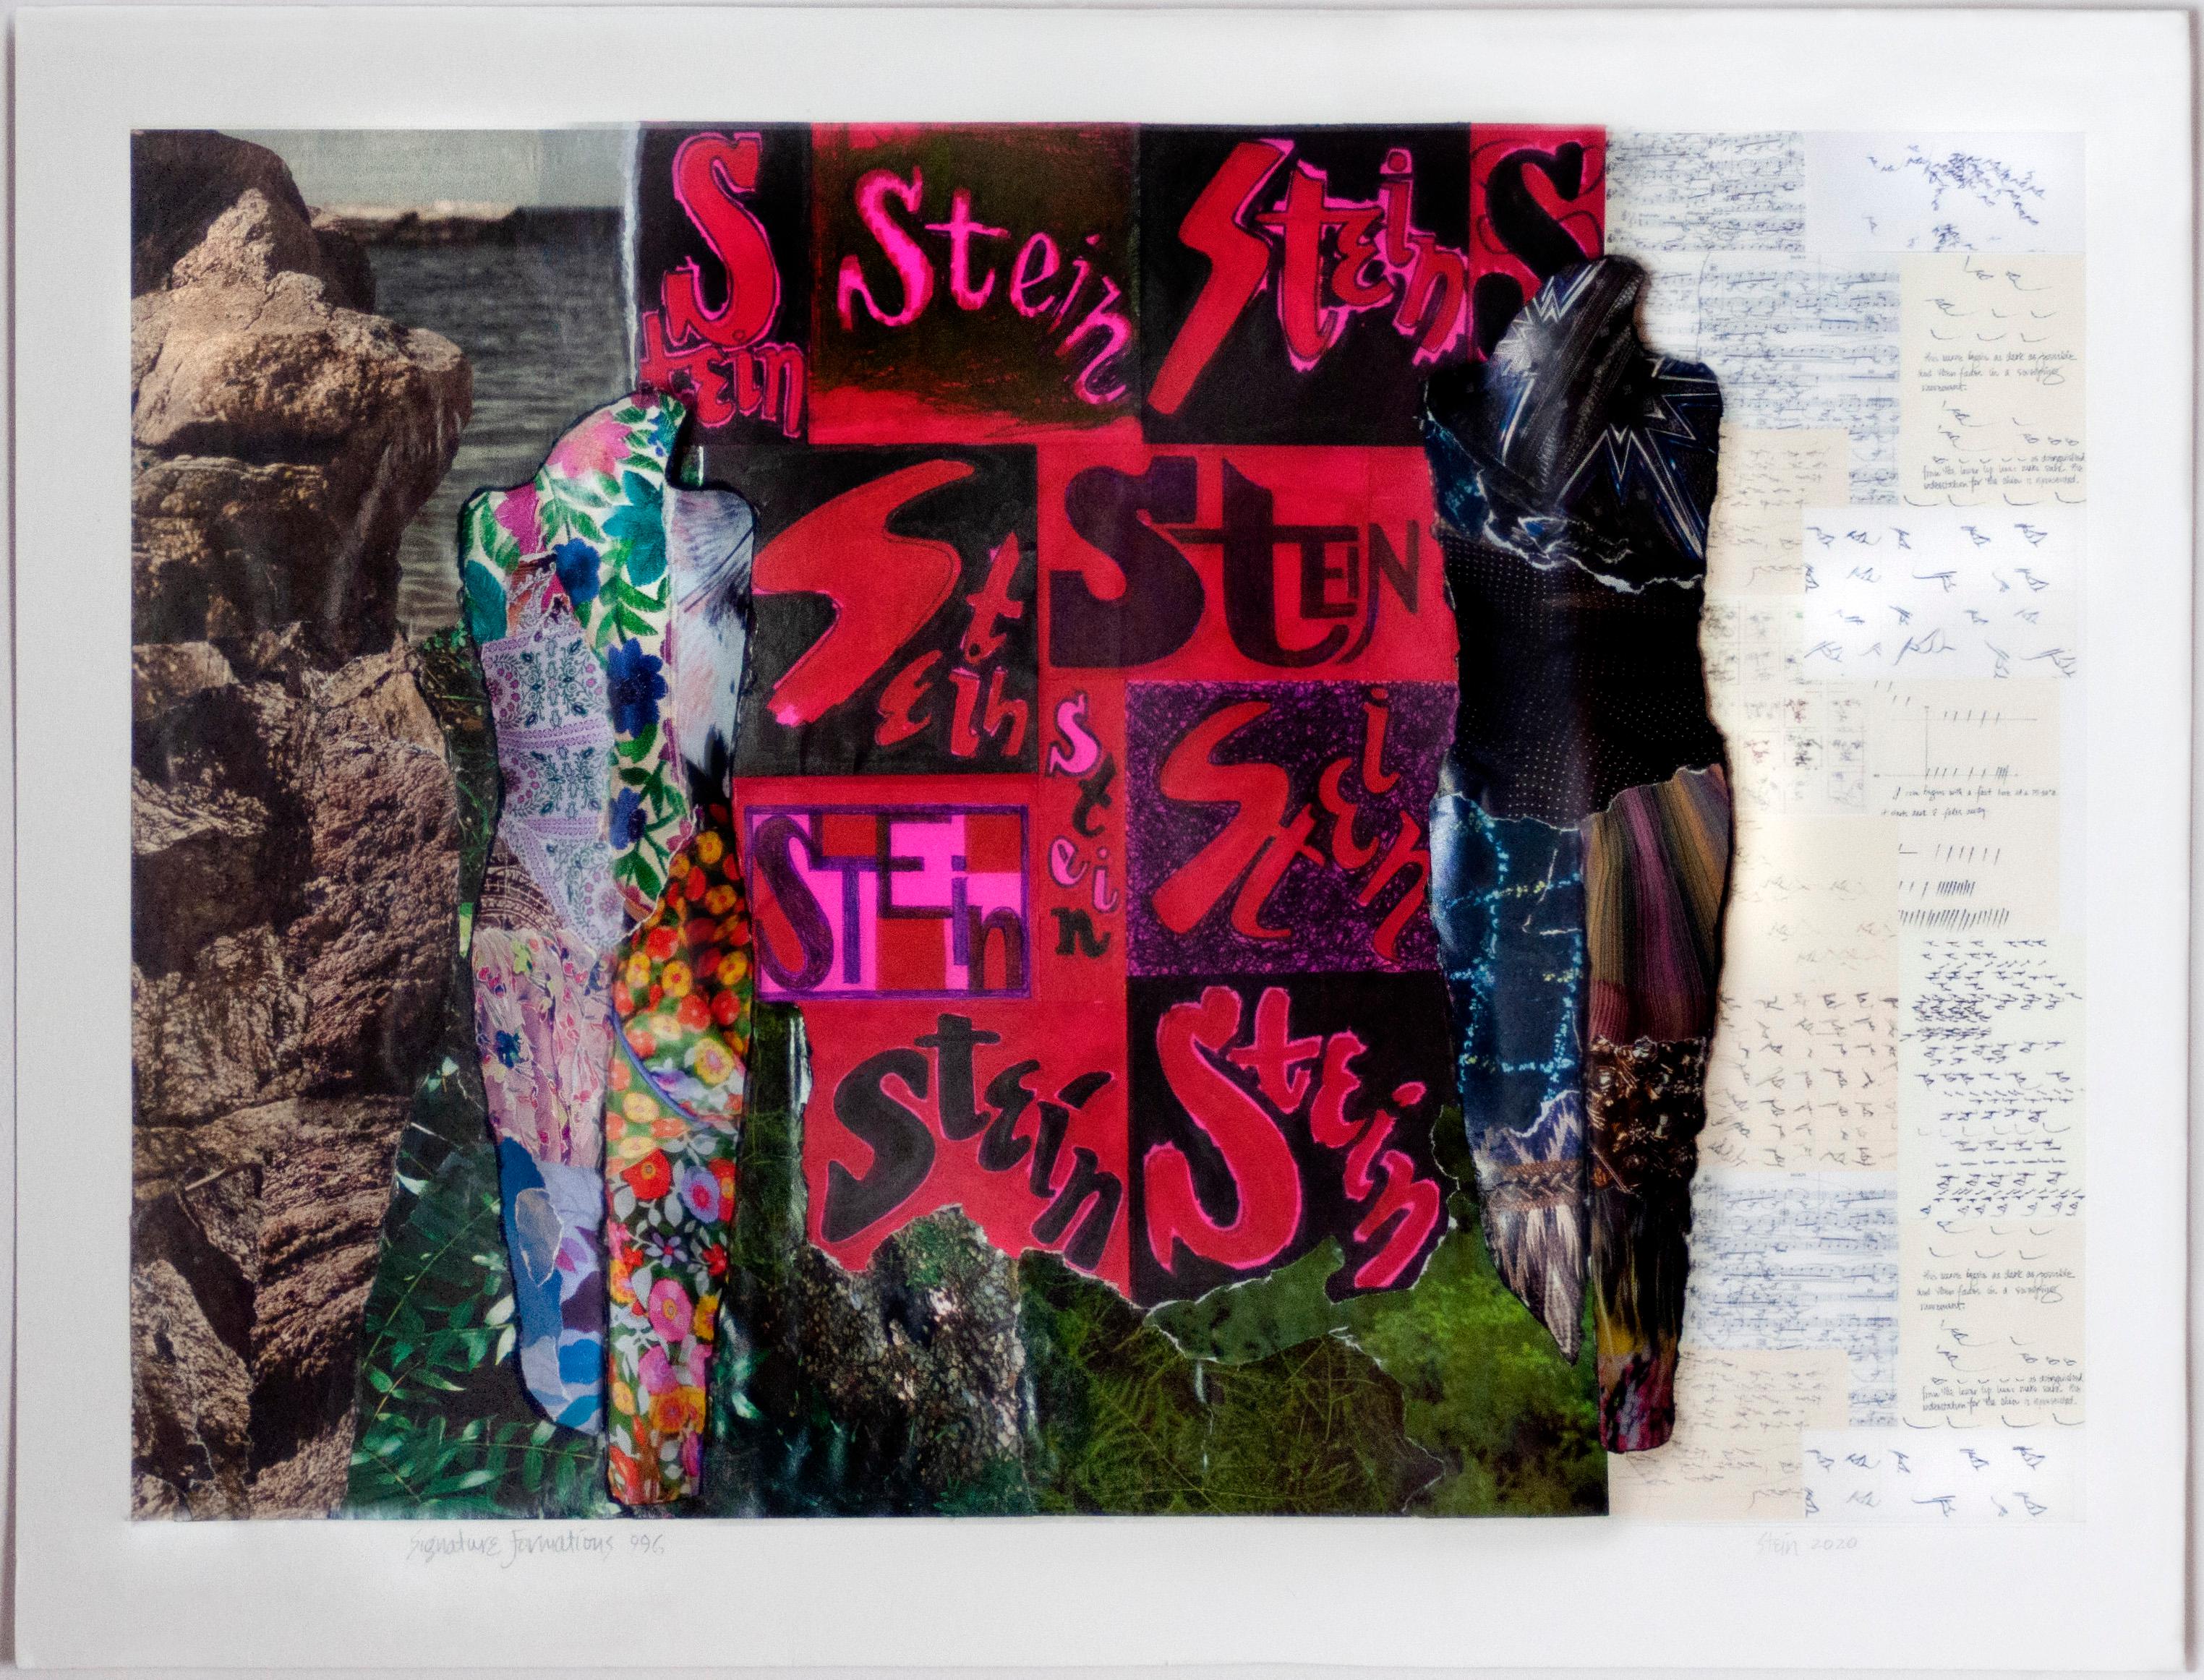 Linda Stein, Signature Formations 996 - Contemporary 3D Sculptural Drawing Collage

In 2000,  Linda Stein began a series called Knights of Protection.  Her Knights functioned both as defenders in battle and symbols of pacifism.  

In 2019, Stein